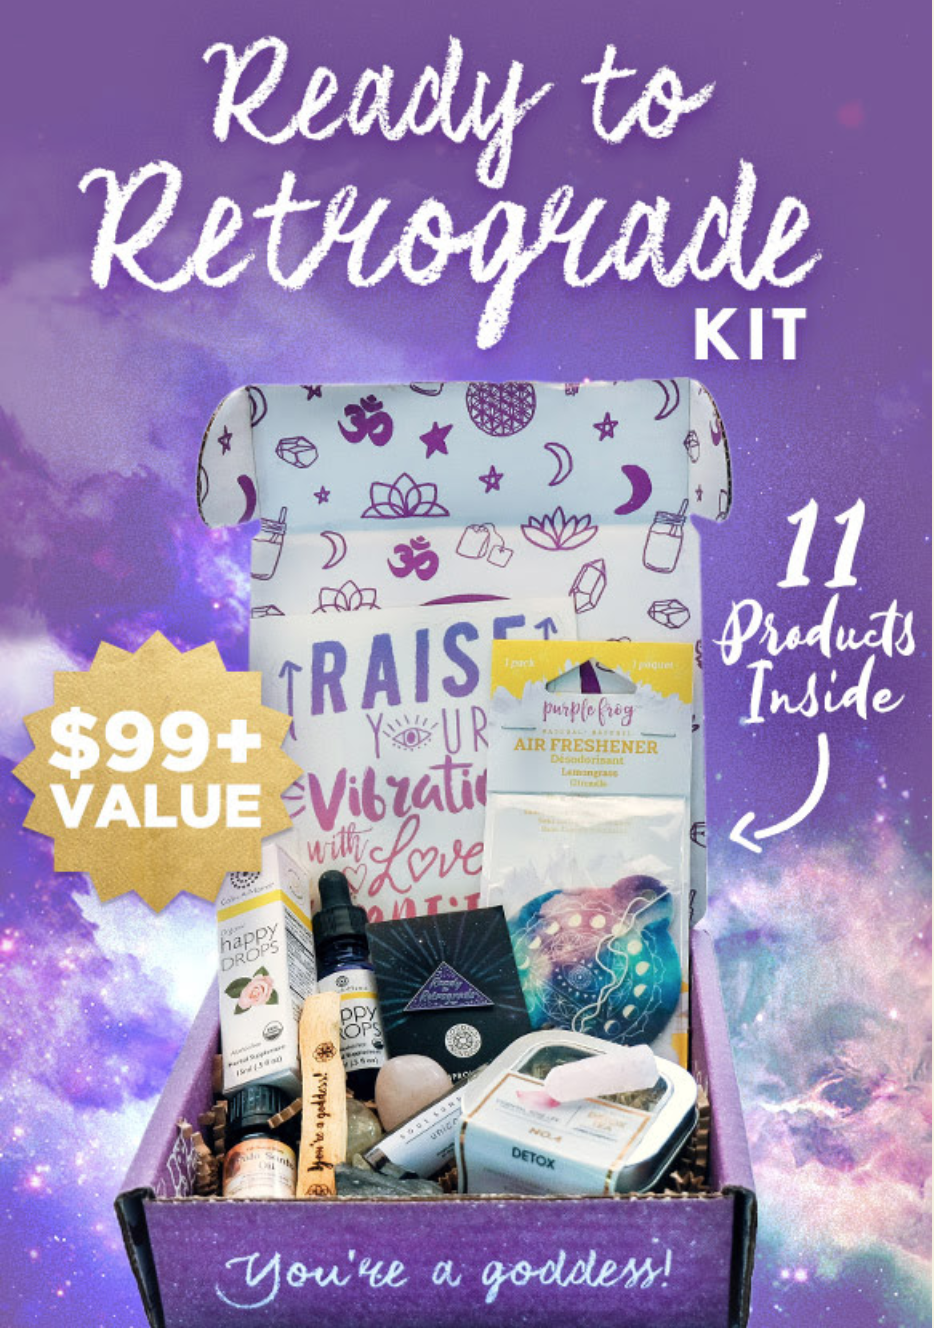 Goddess Provisions Limited Edition Ready to Retrograde Kit – Available Now!